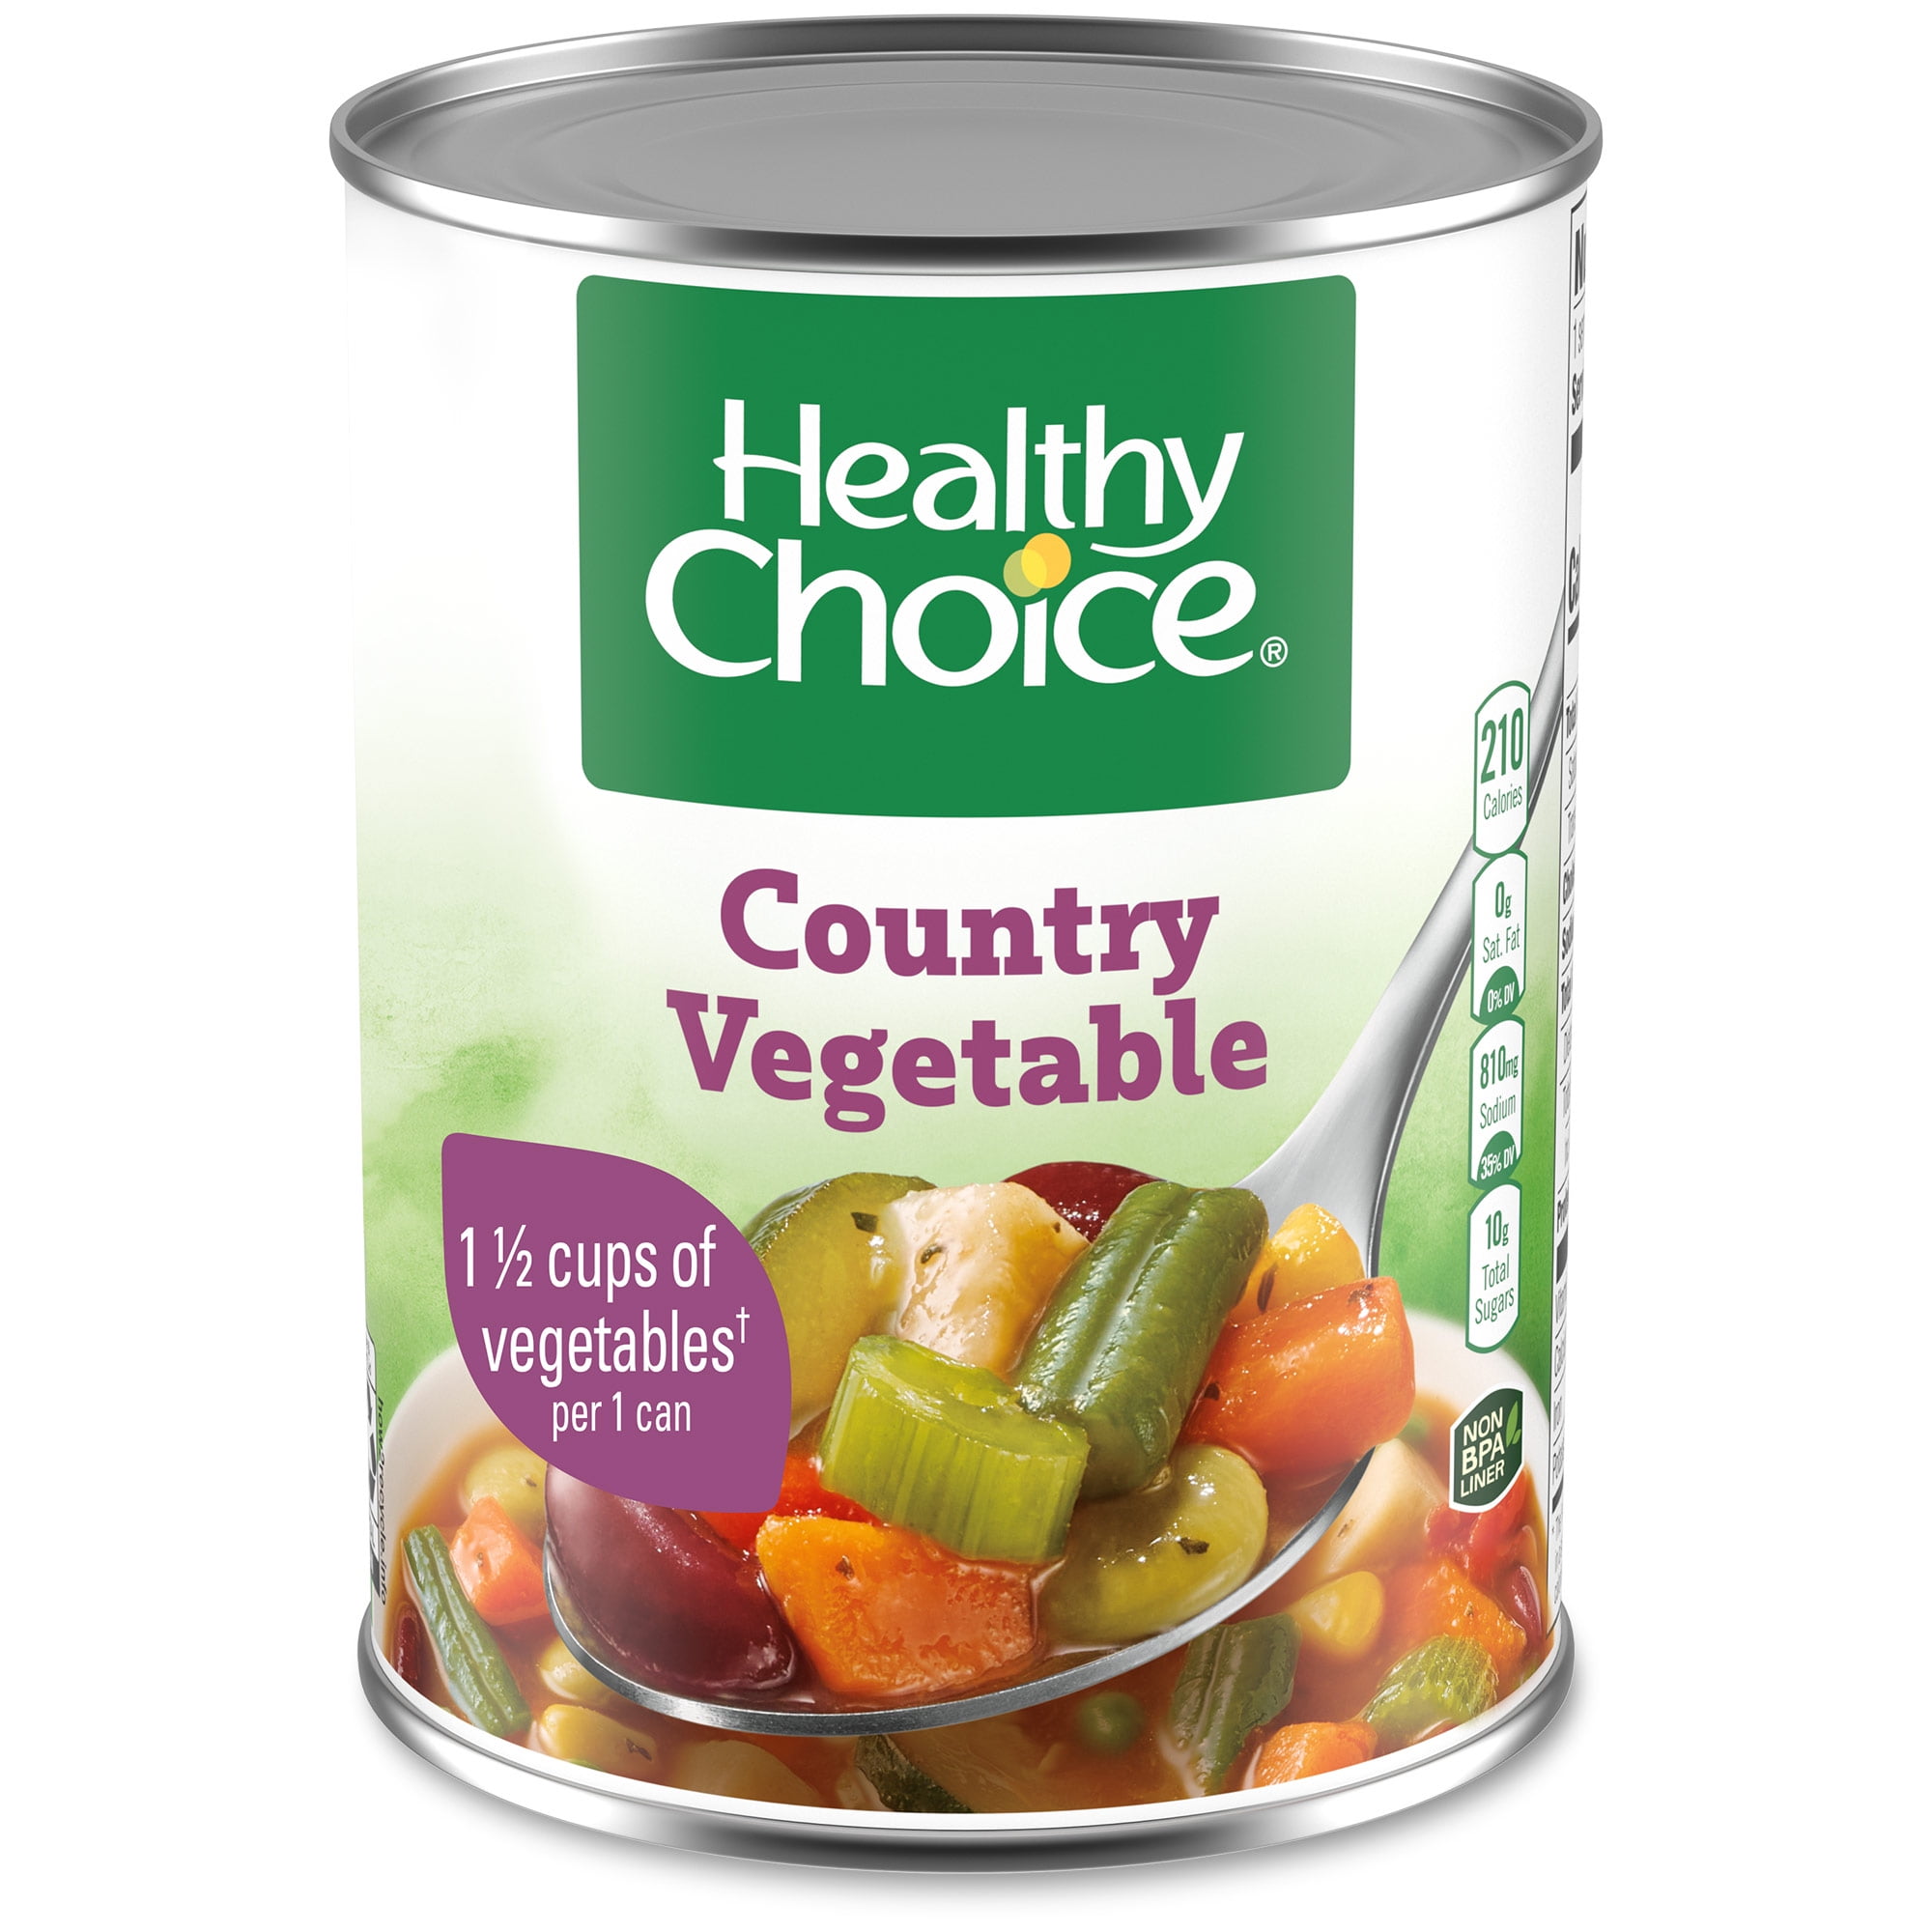 Healthy Choice Country Vegetable Canned Soup, 15 oz - Walmart.com